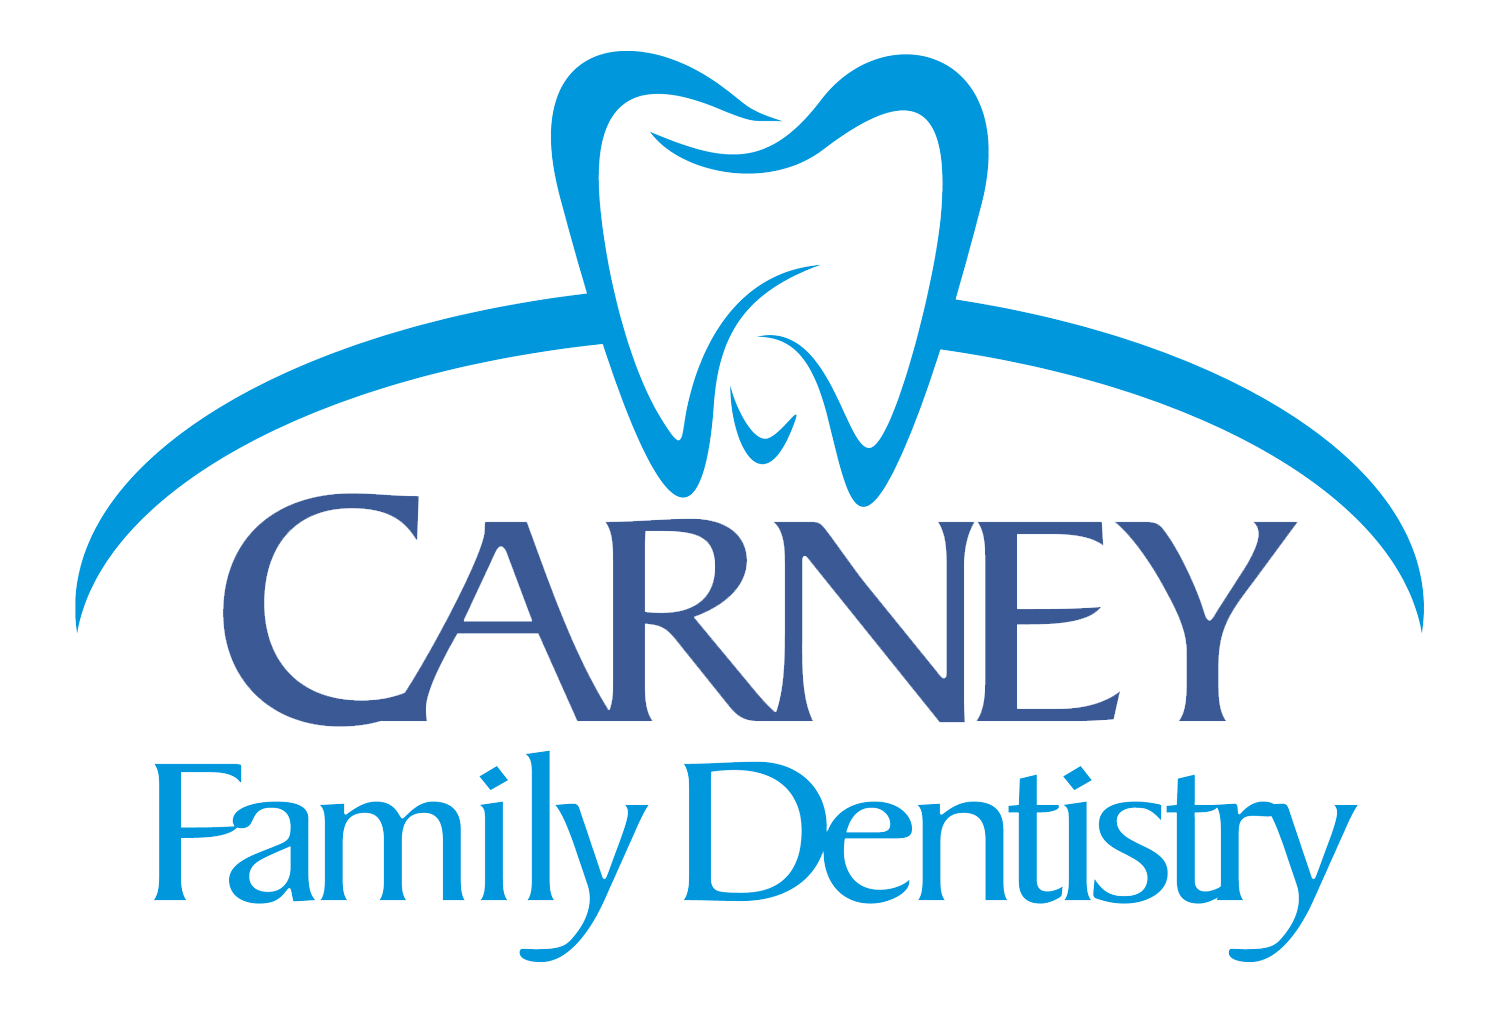 Link to Carney Family Dentistry home page